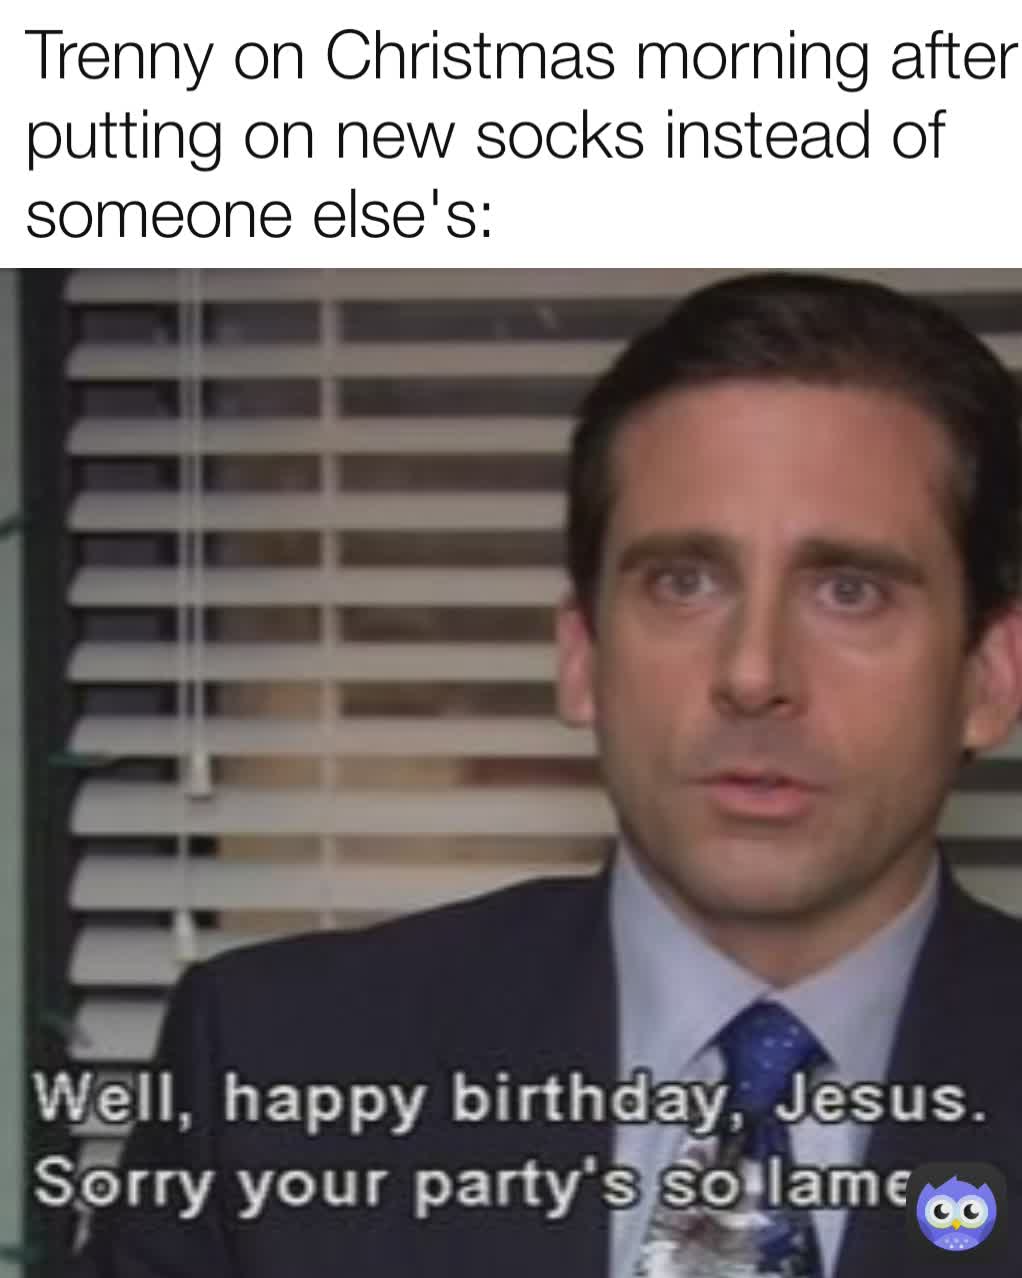 Trenny on Christmas morning after putting on new socks instead of someone else's: